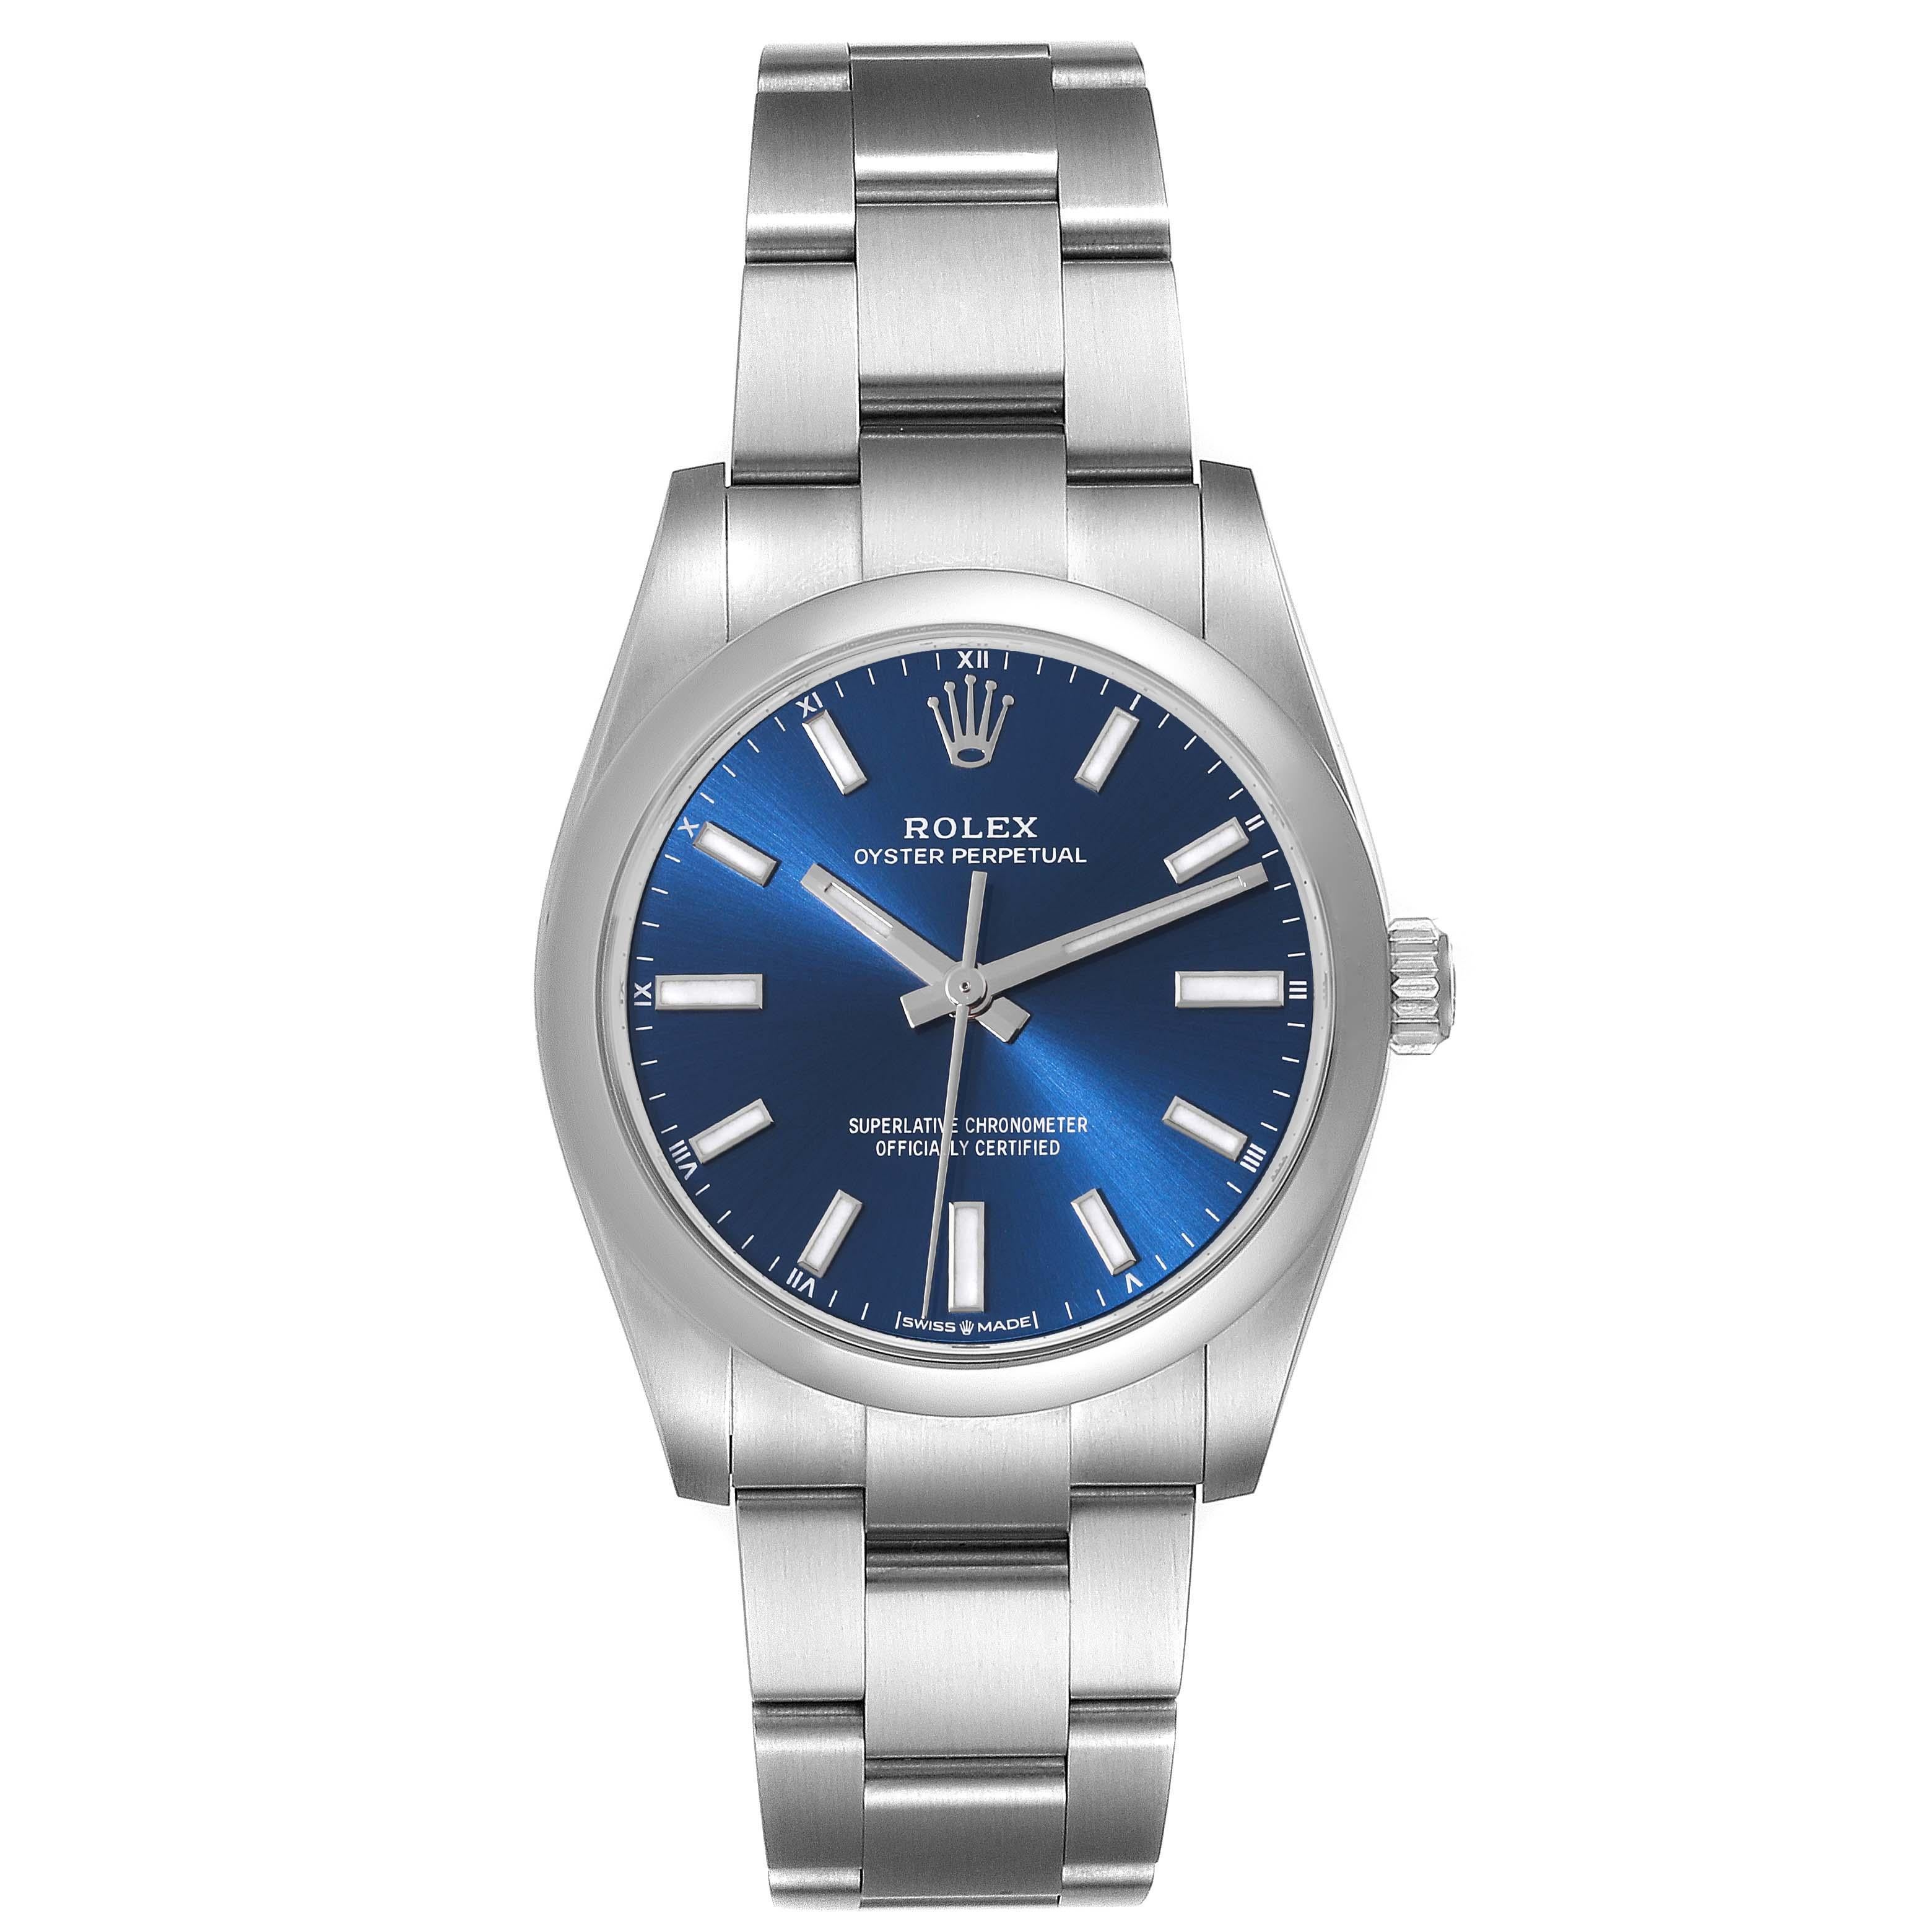 Rolex Oyster Perpetual 34mm Blue Dial Steel Mens Watch 124200 Box Card. Officially certified chronometer self-winding movement. Stainless steel case 34 mm in diameter. Rolex logo on a crown. Stainless steel smooth domed bezel. Scratch resistant